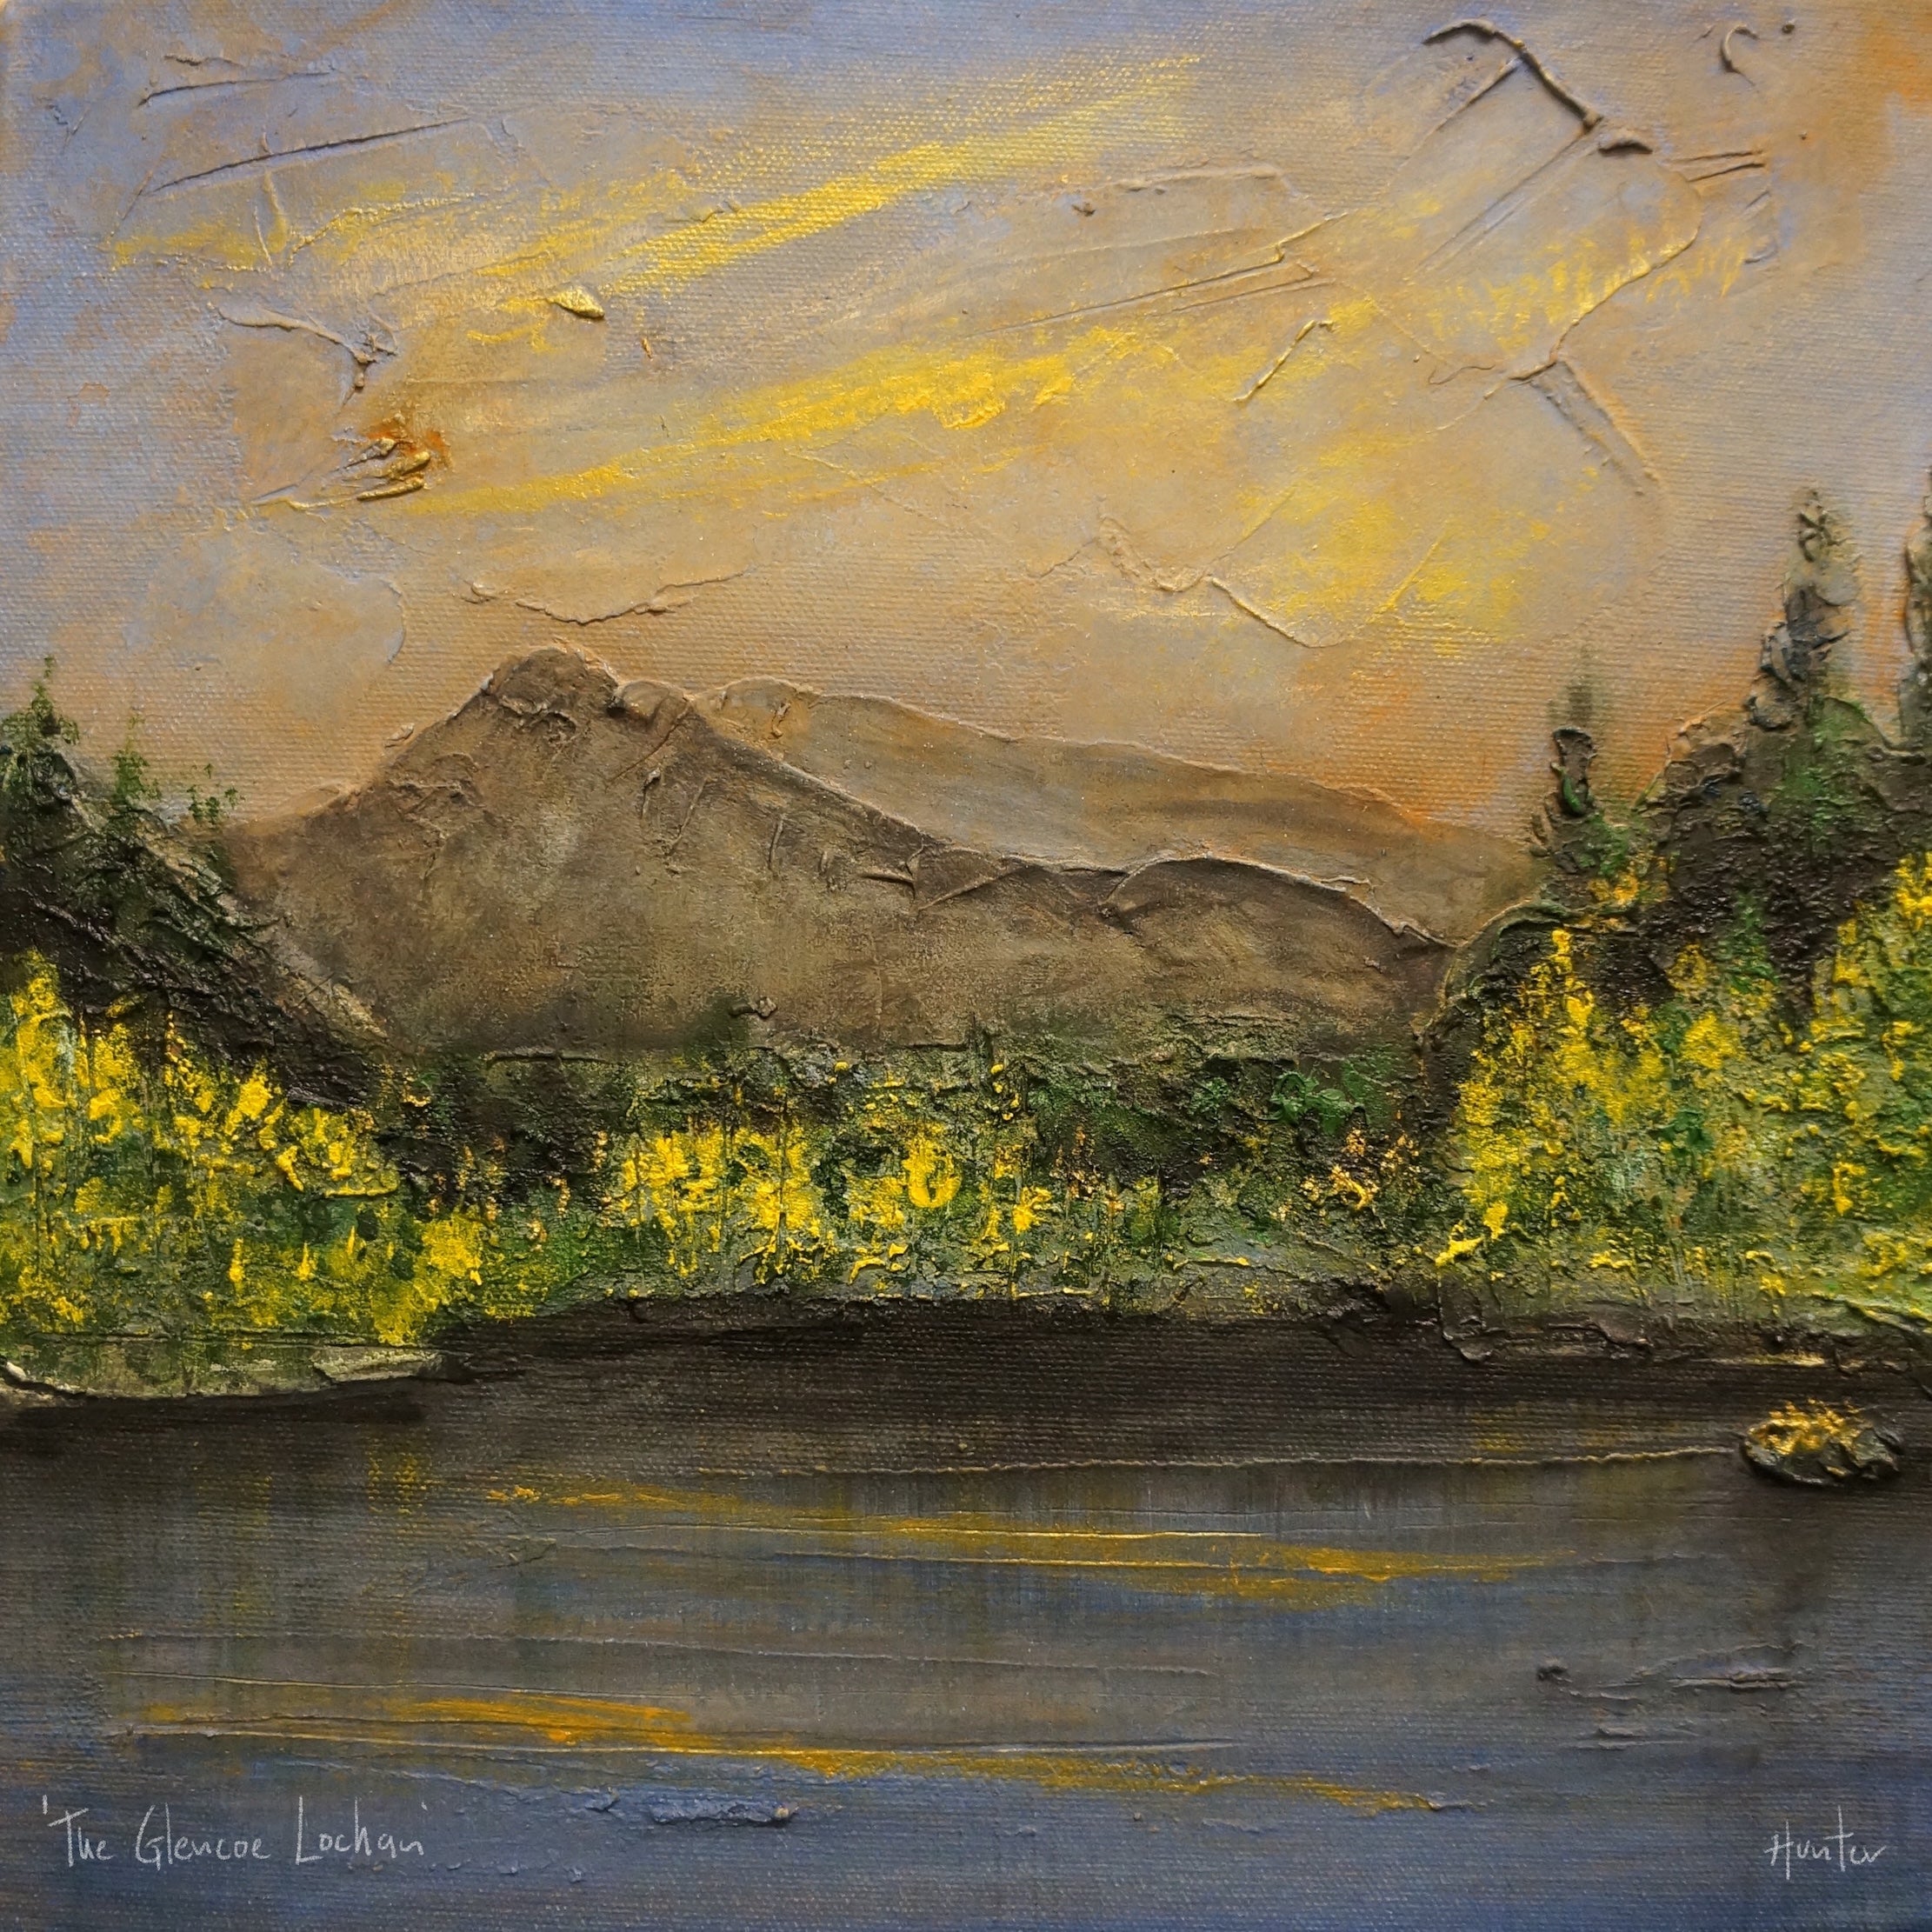 Glencoe Lochan Dusk | Scotland In Your Pocket Art Print-Scotland In Your Pocket Framed Prints-Scottish Lochs & Mountains Art Gallery-Mounted & Cello Bag: 12.5x12.5 cm-Black Frame-Paintings, Prints, Homeware, Art Gifts From Scotland By Scottish Artist Kevin Hunter